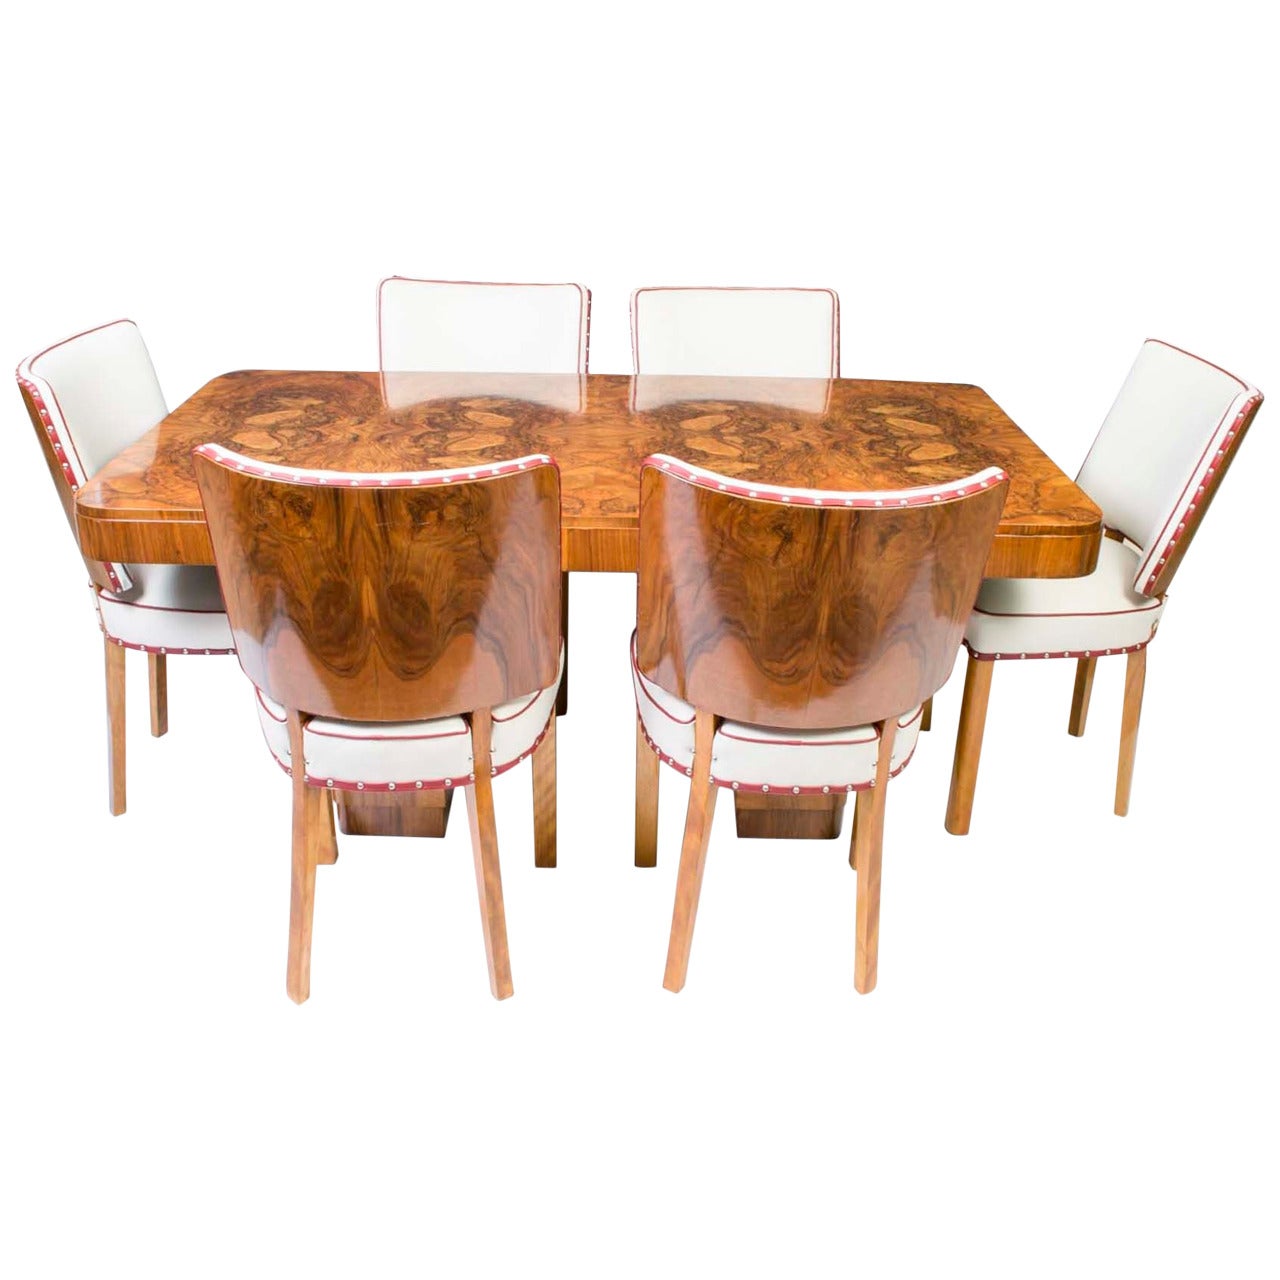 Antique Art Deco Walnut Dining Table and Six Chairs, circa 1920